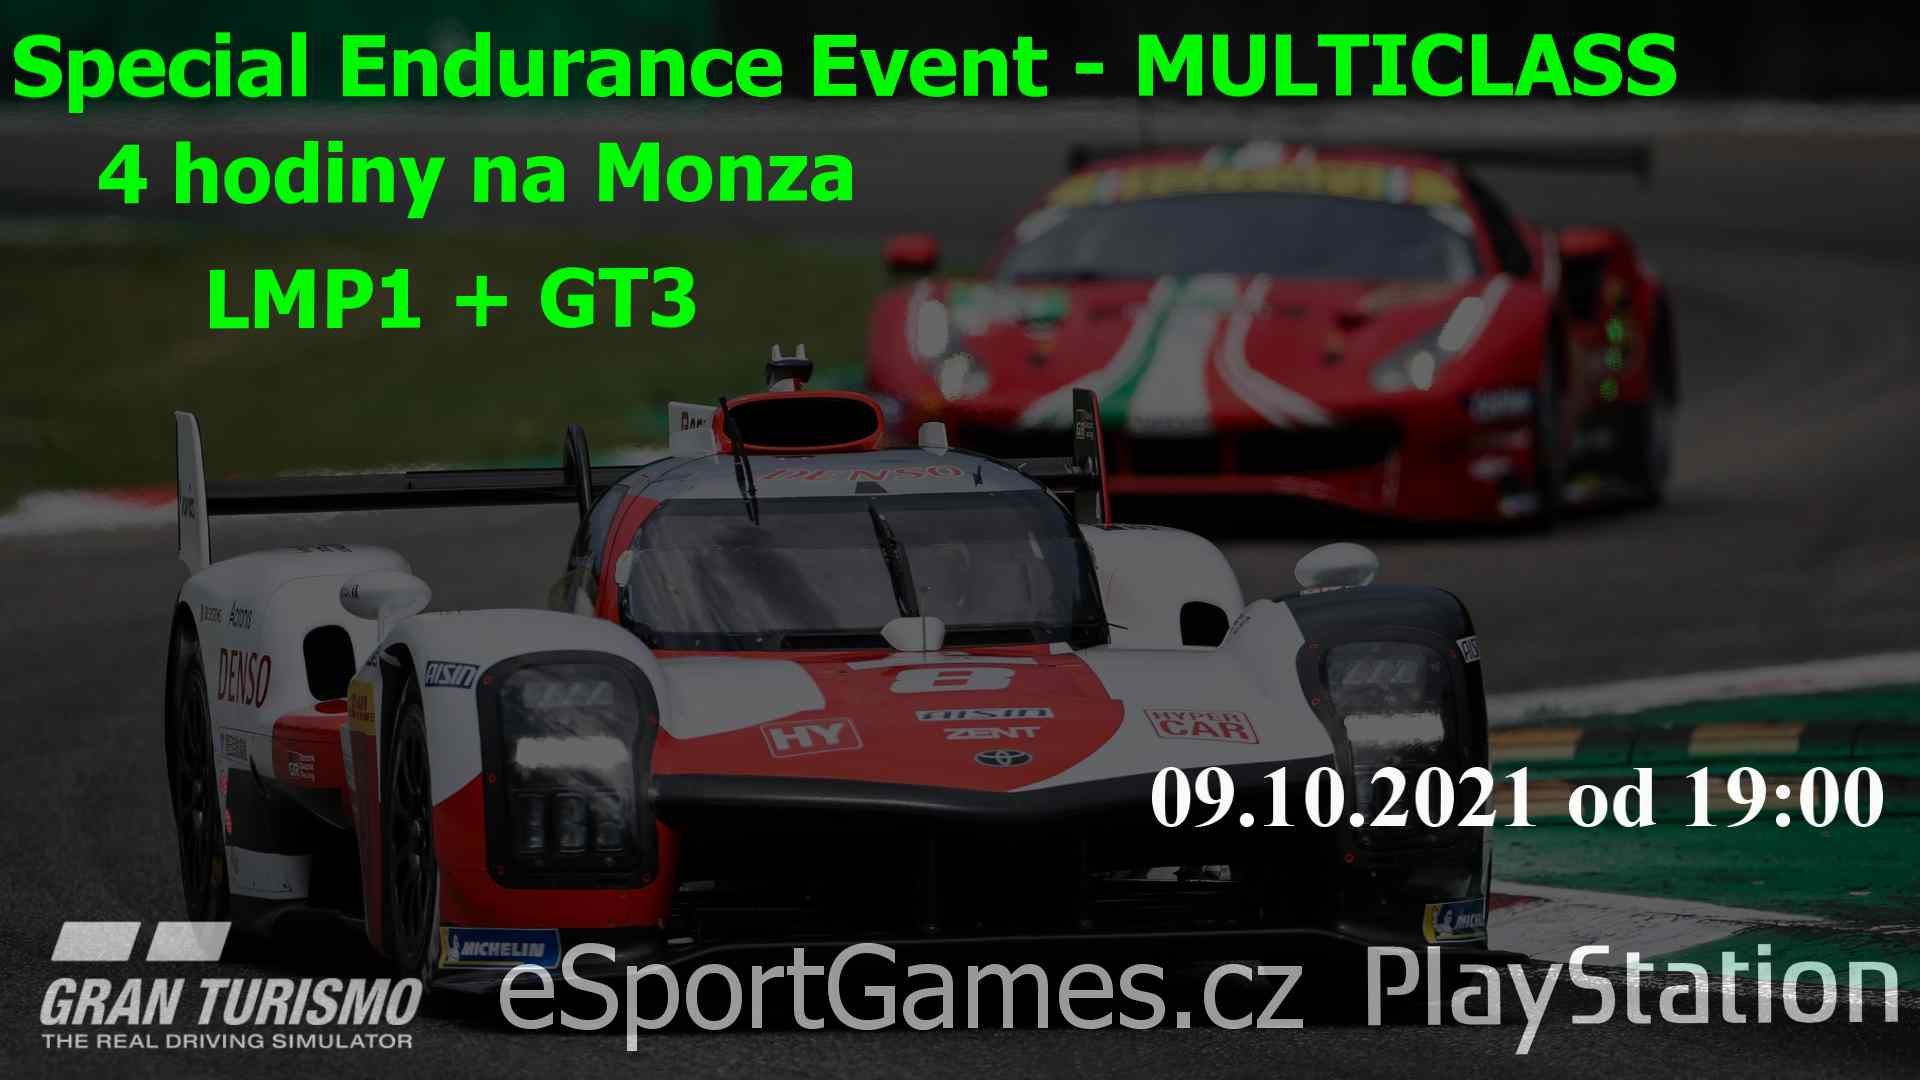 Special Endurance Event - 4h on Monza - Multiclass